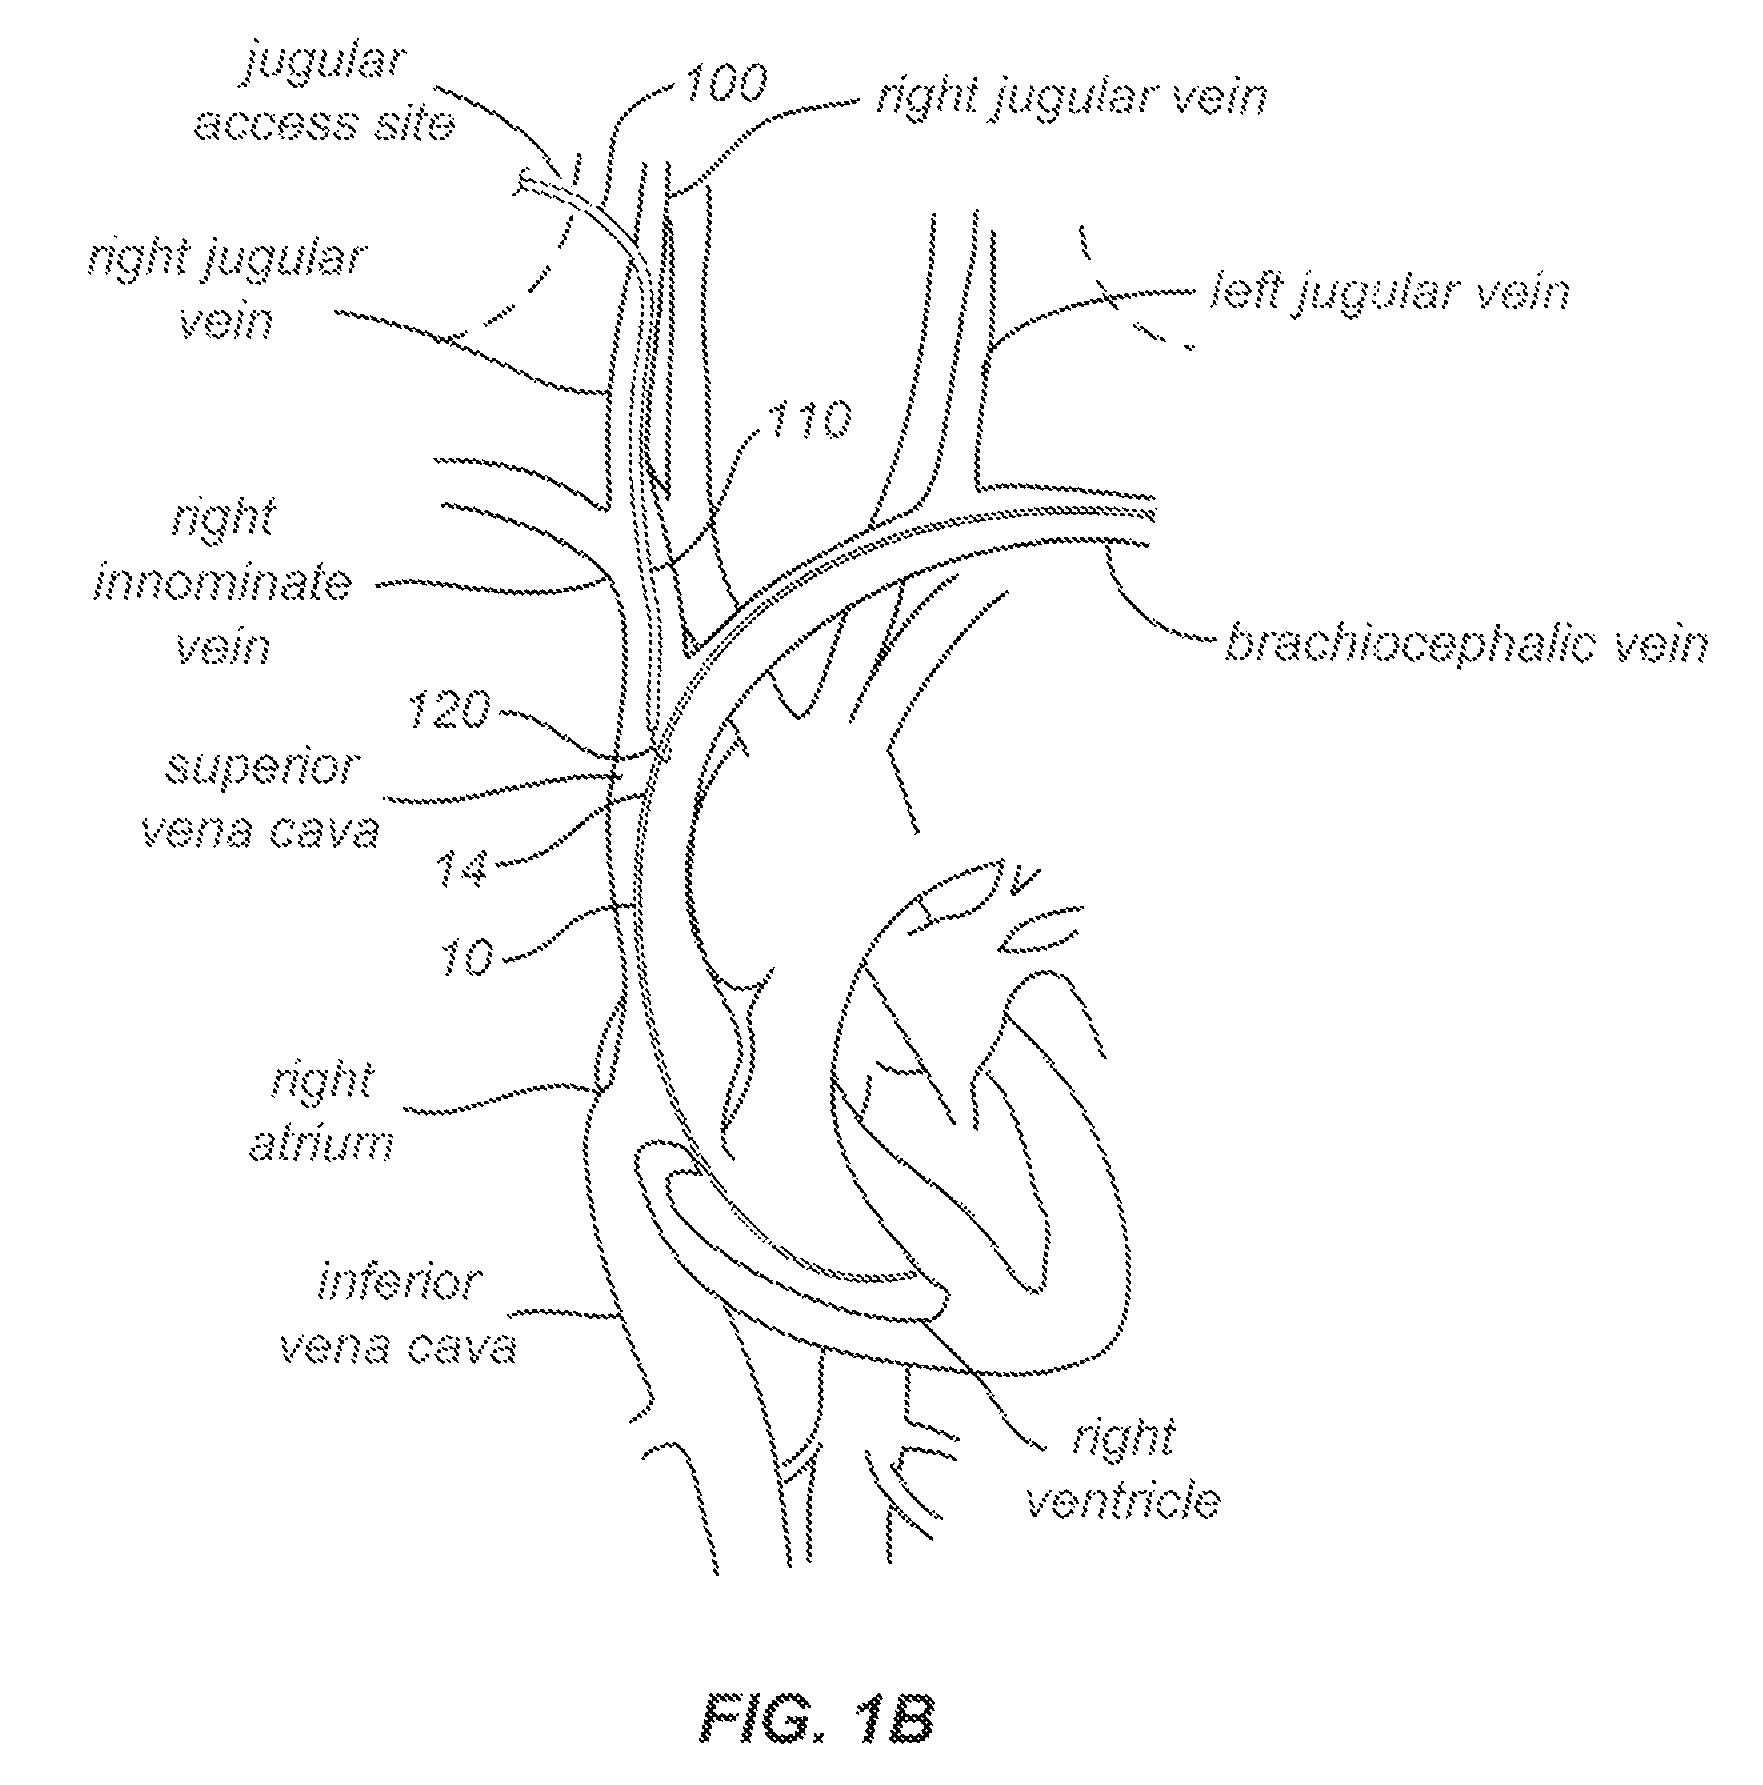 Snaring systems and methods